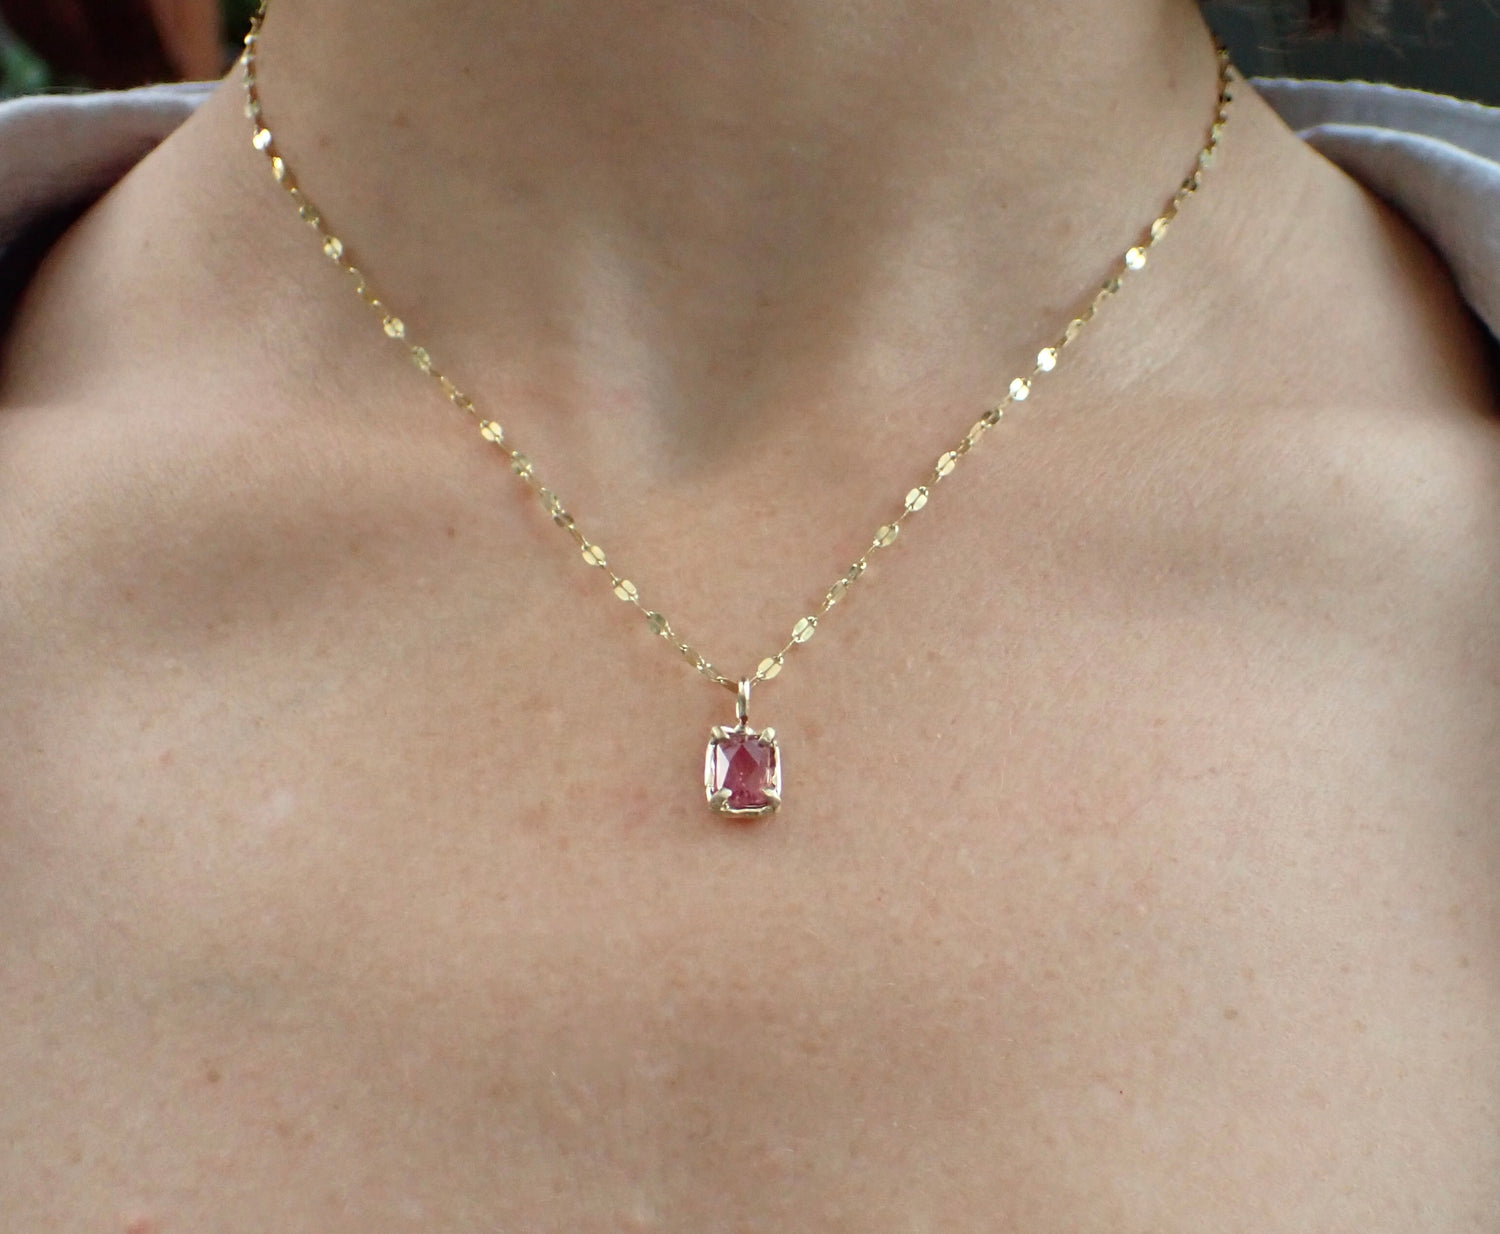 Pink Tourmaline Necklace - mossNstone